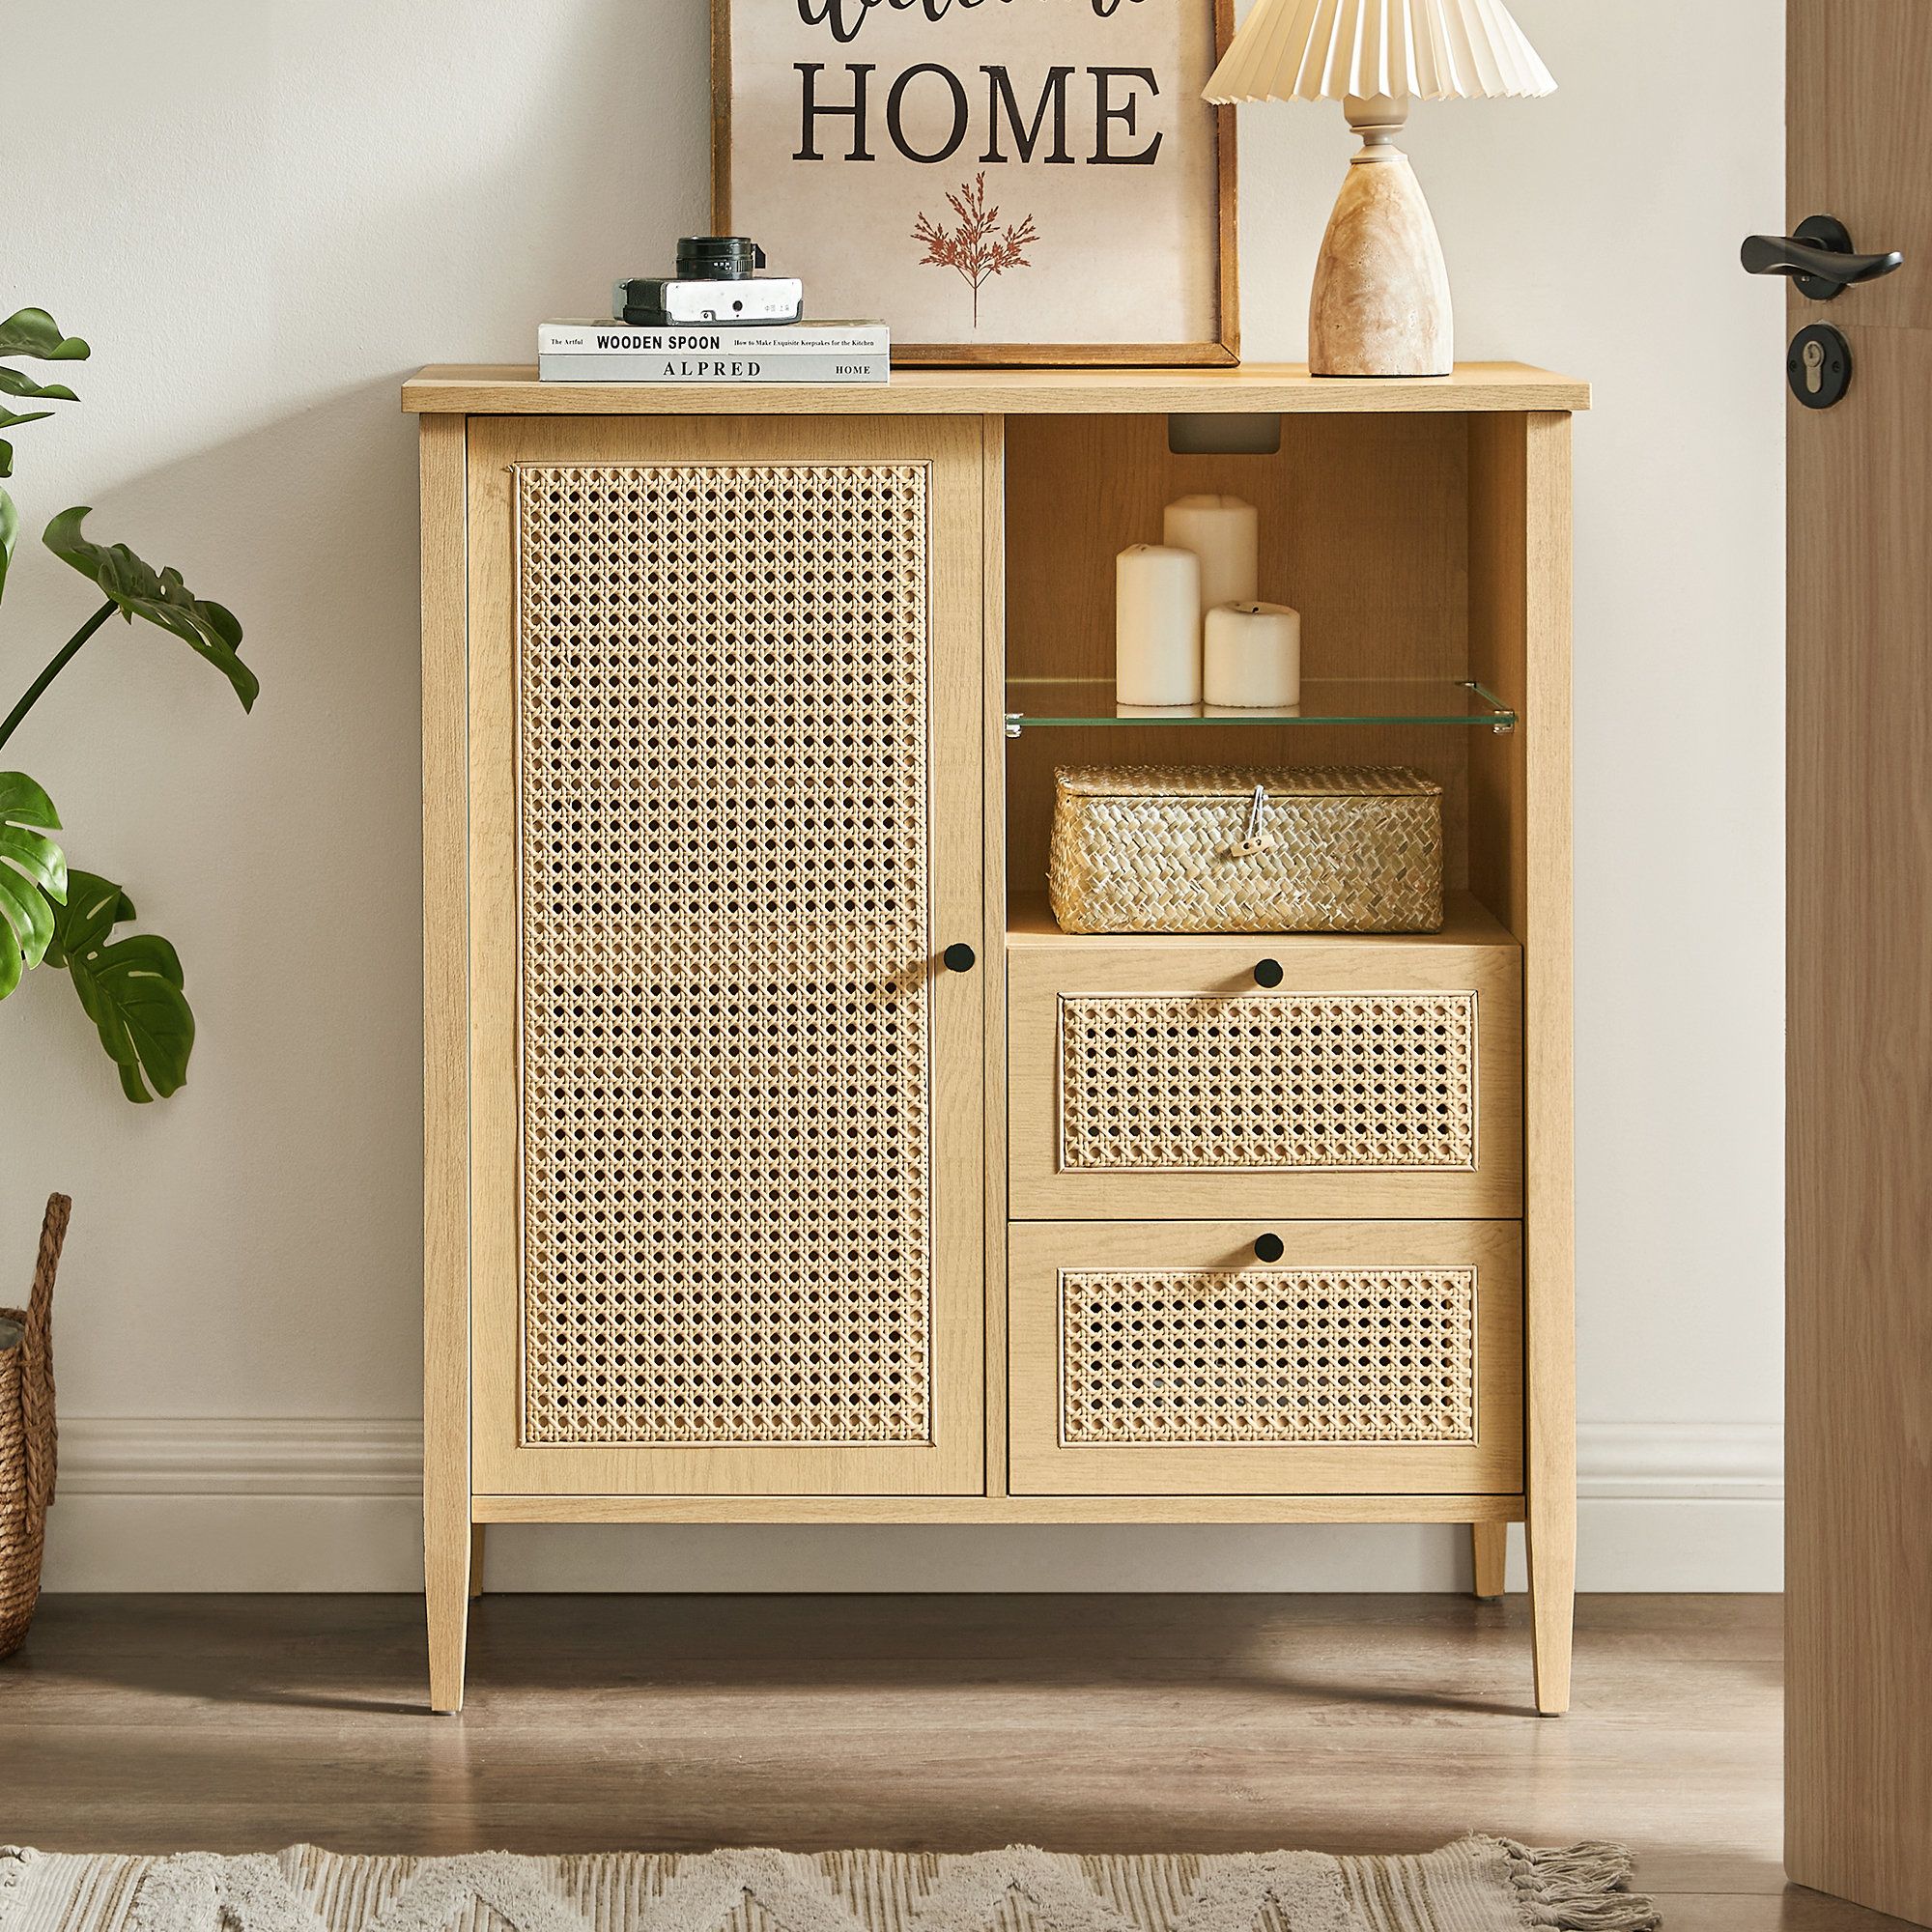 Beachcrest Home Leclair Buffet Cabinet, Synthetic Rattan Sideboard, Storage  Cabinet With Adjustable Shelves & Reviews | Wayfair With Regard To Assembled Rattan Sideboards (View 11 of 15)